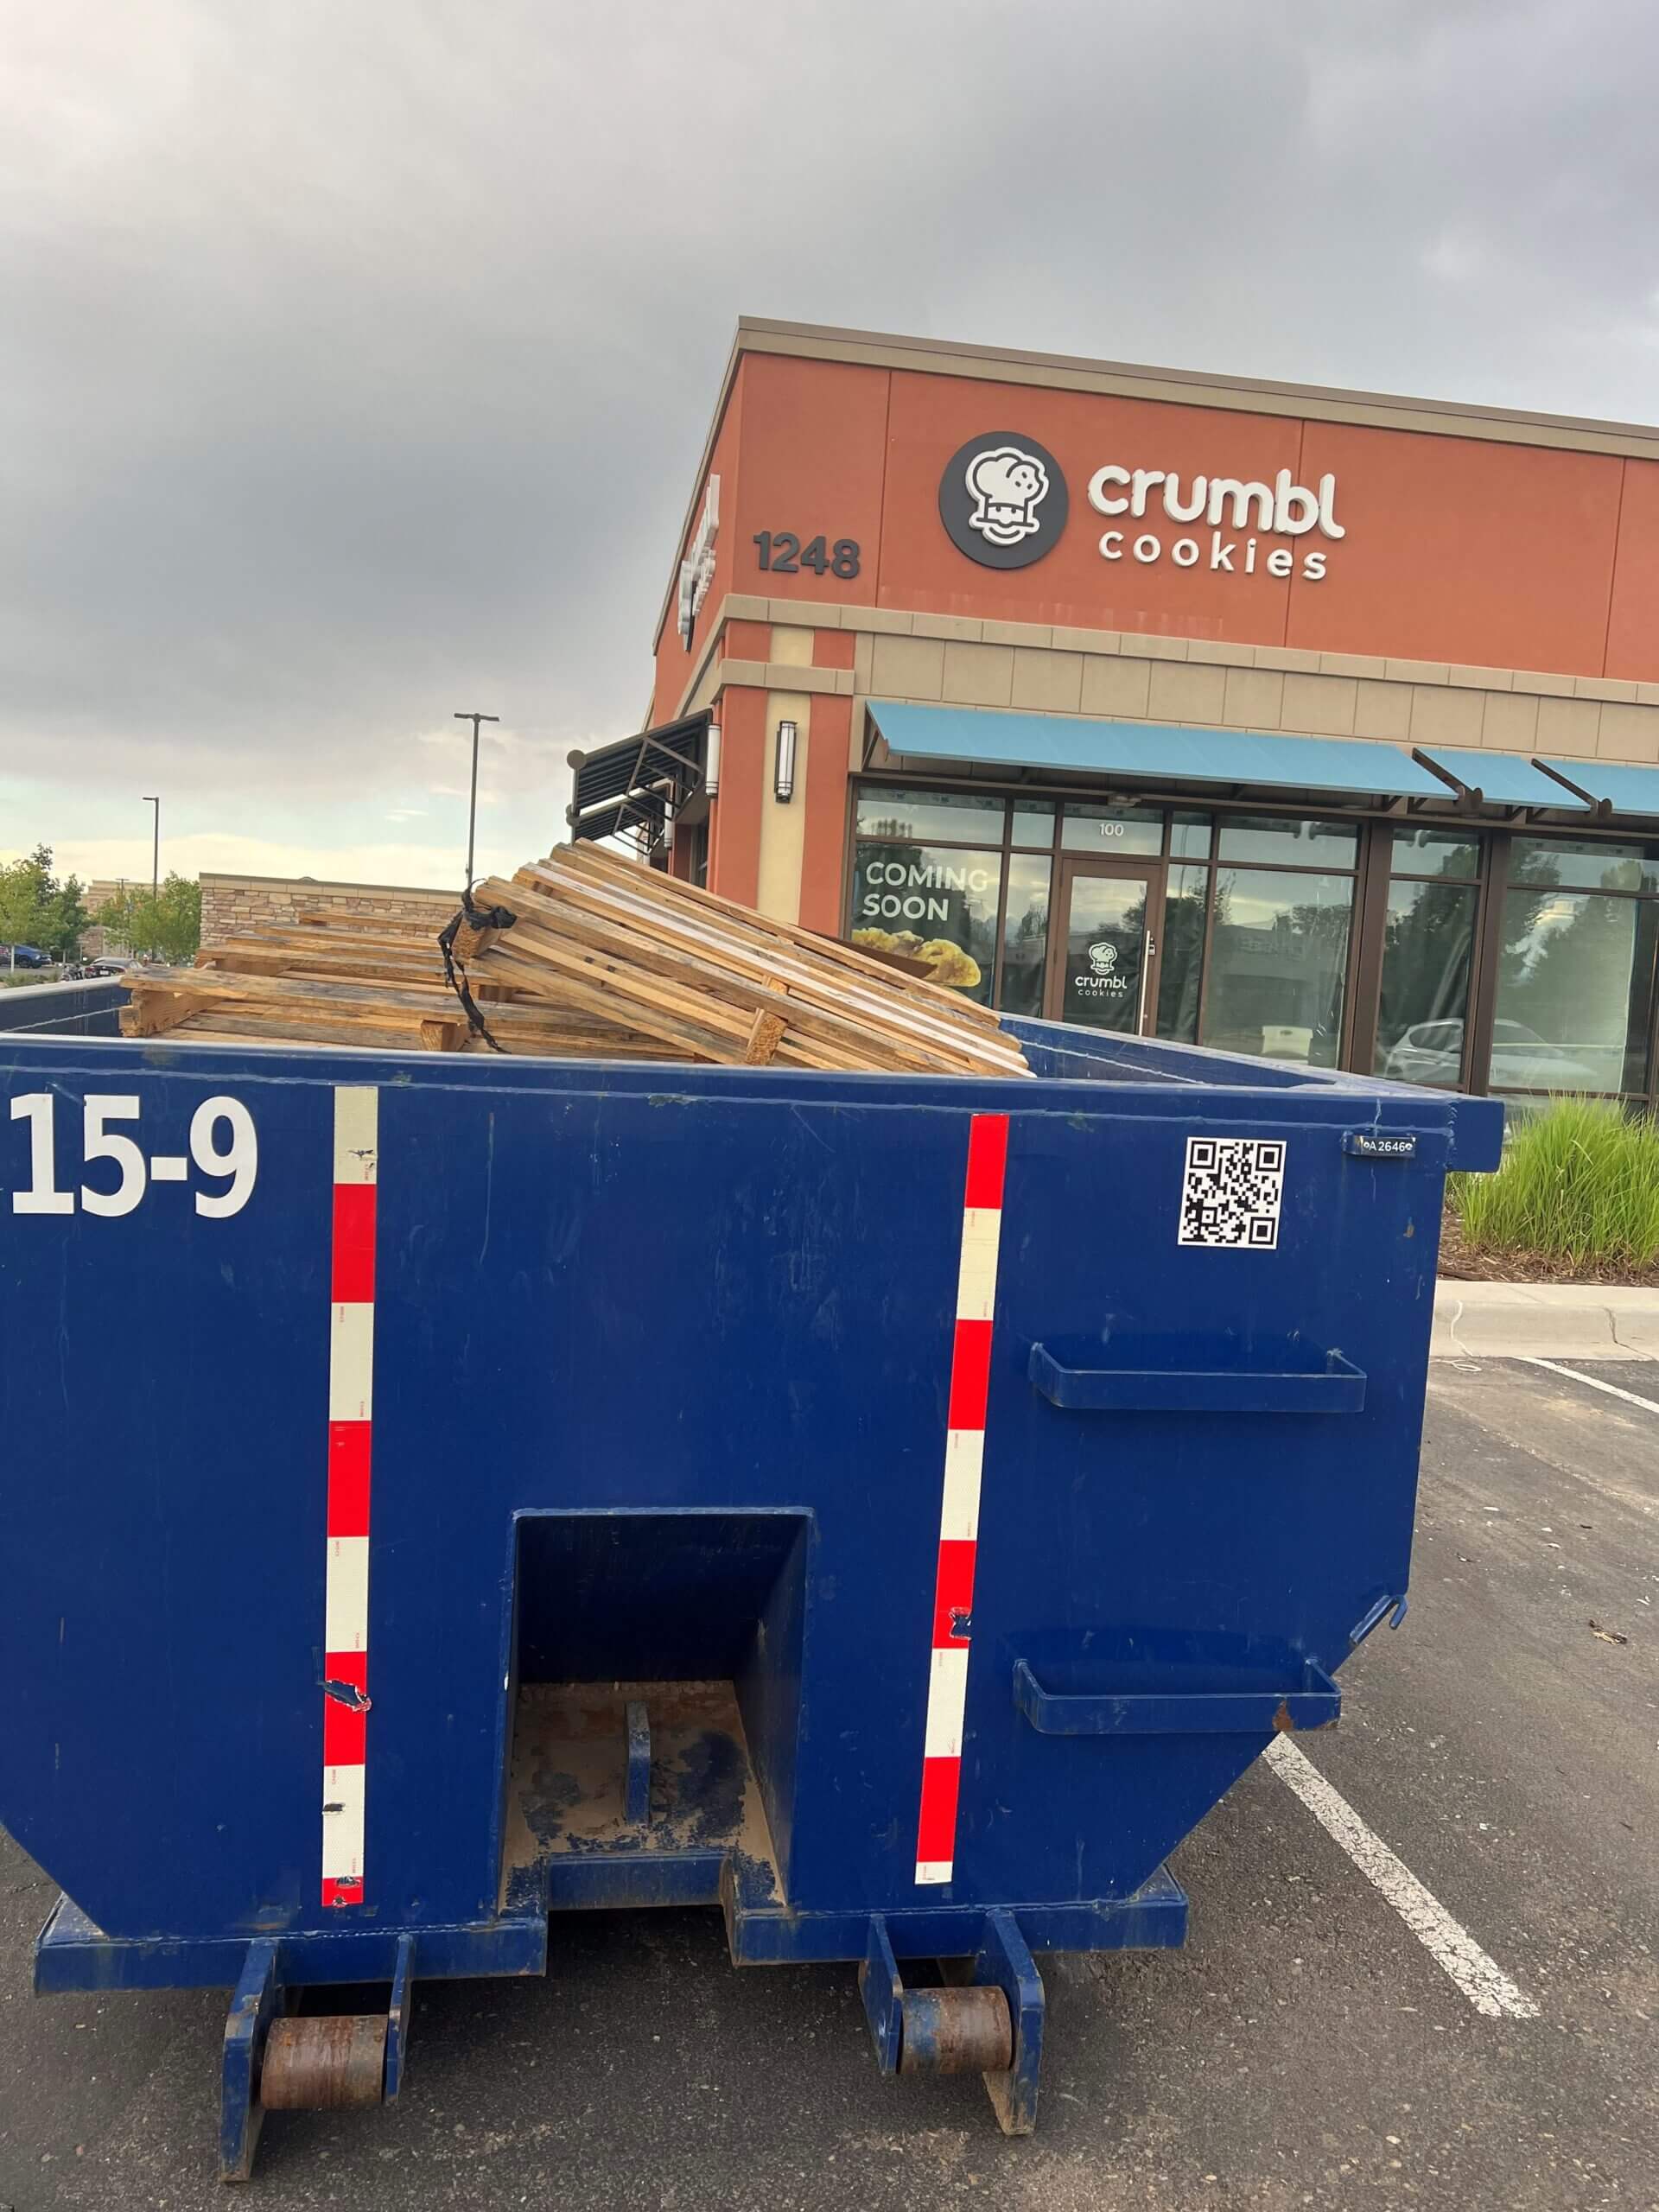 Photo of a blue dumpster rental in Denver, CO, holding plywood